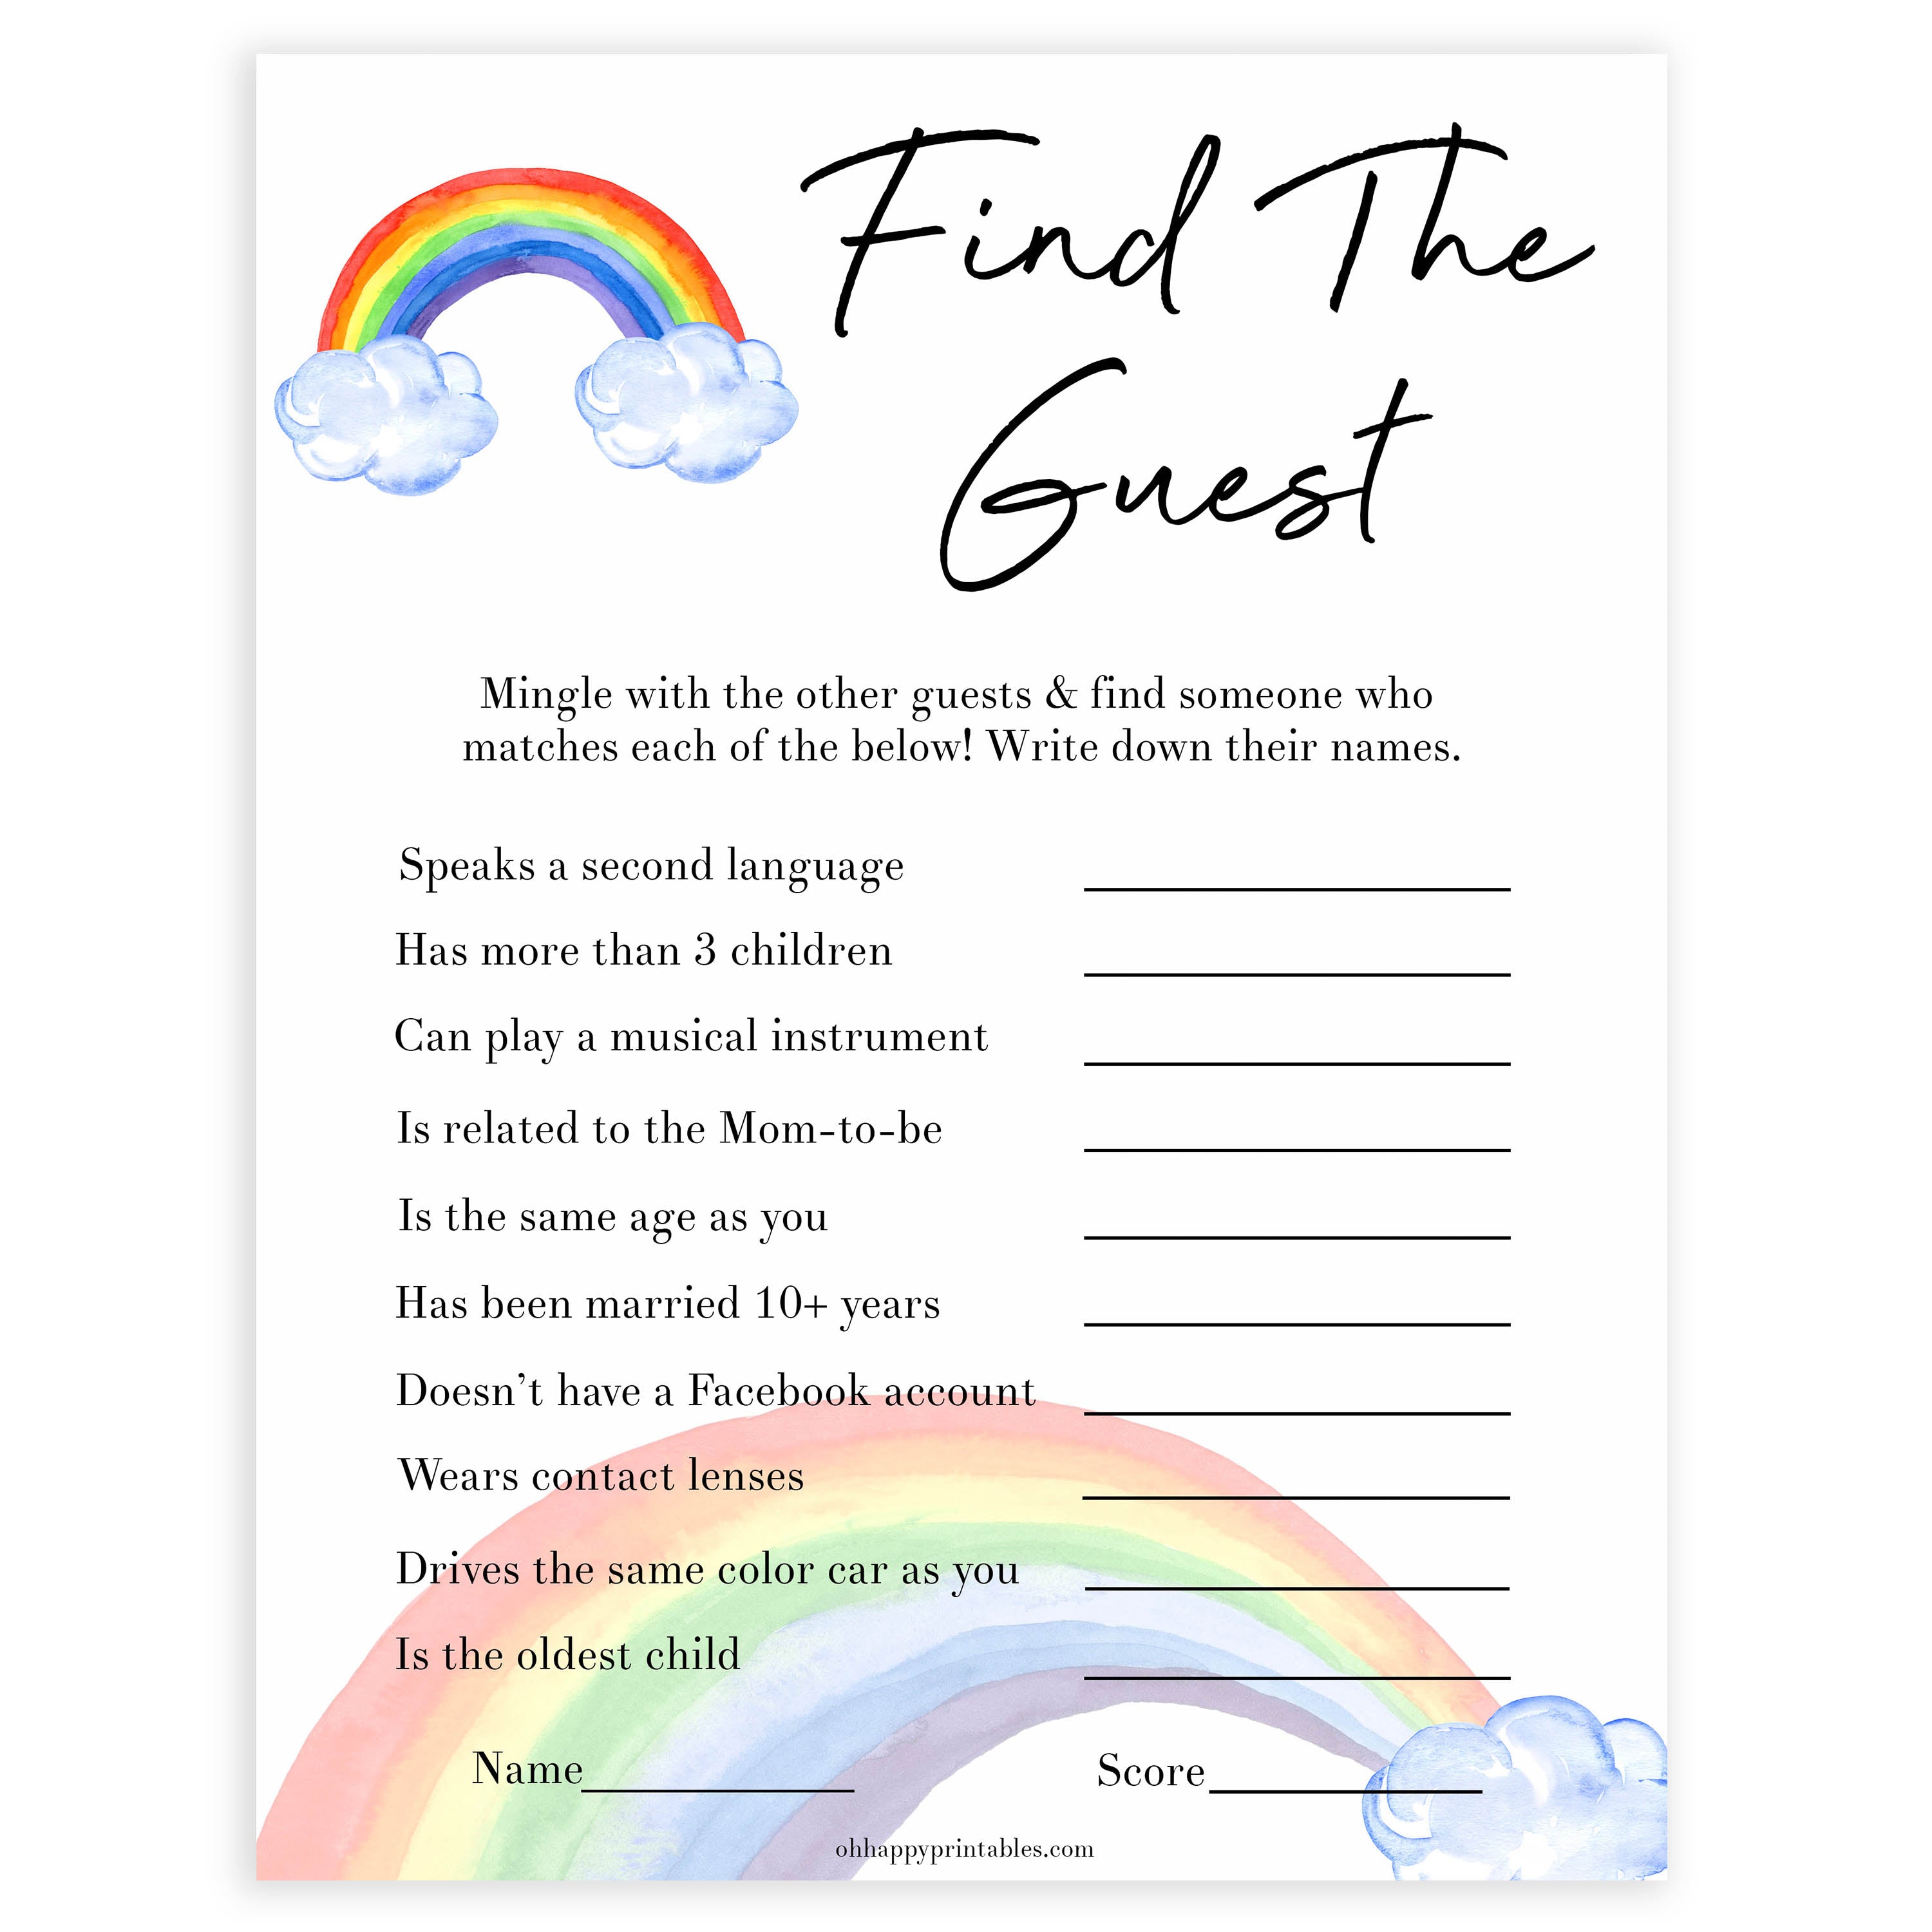 Rainbow baby games, rainbow find the guest, rainbow printable baby games, instant download games, rainbow baby shower, printable baby games, fun baby games, popular baby games, top 10 baby games